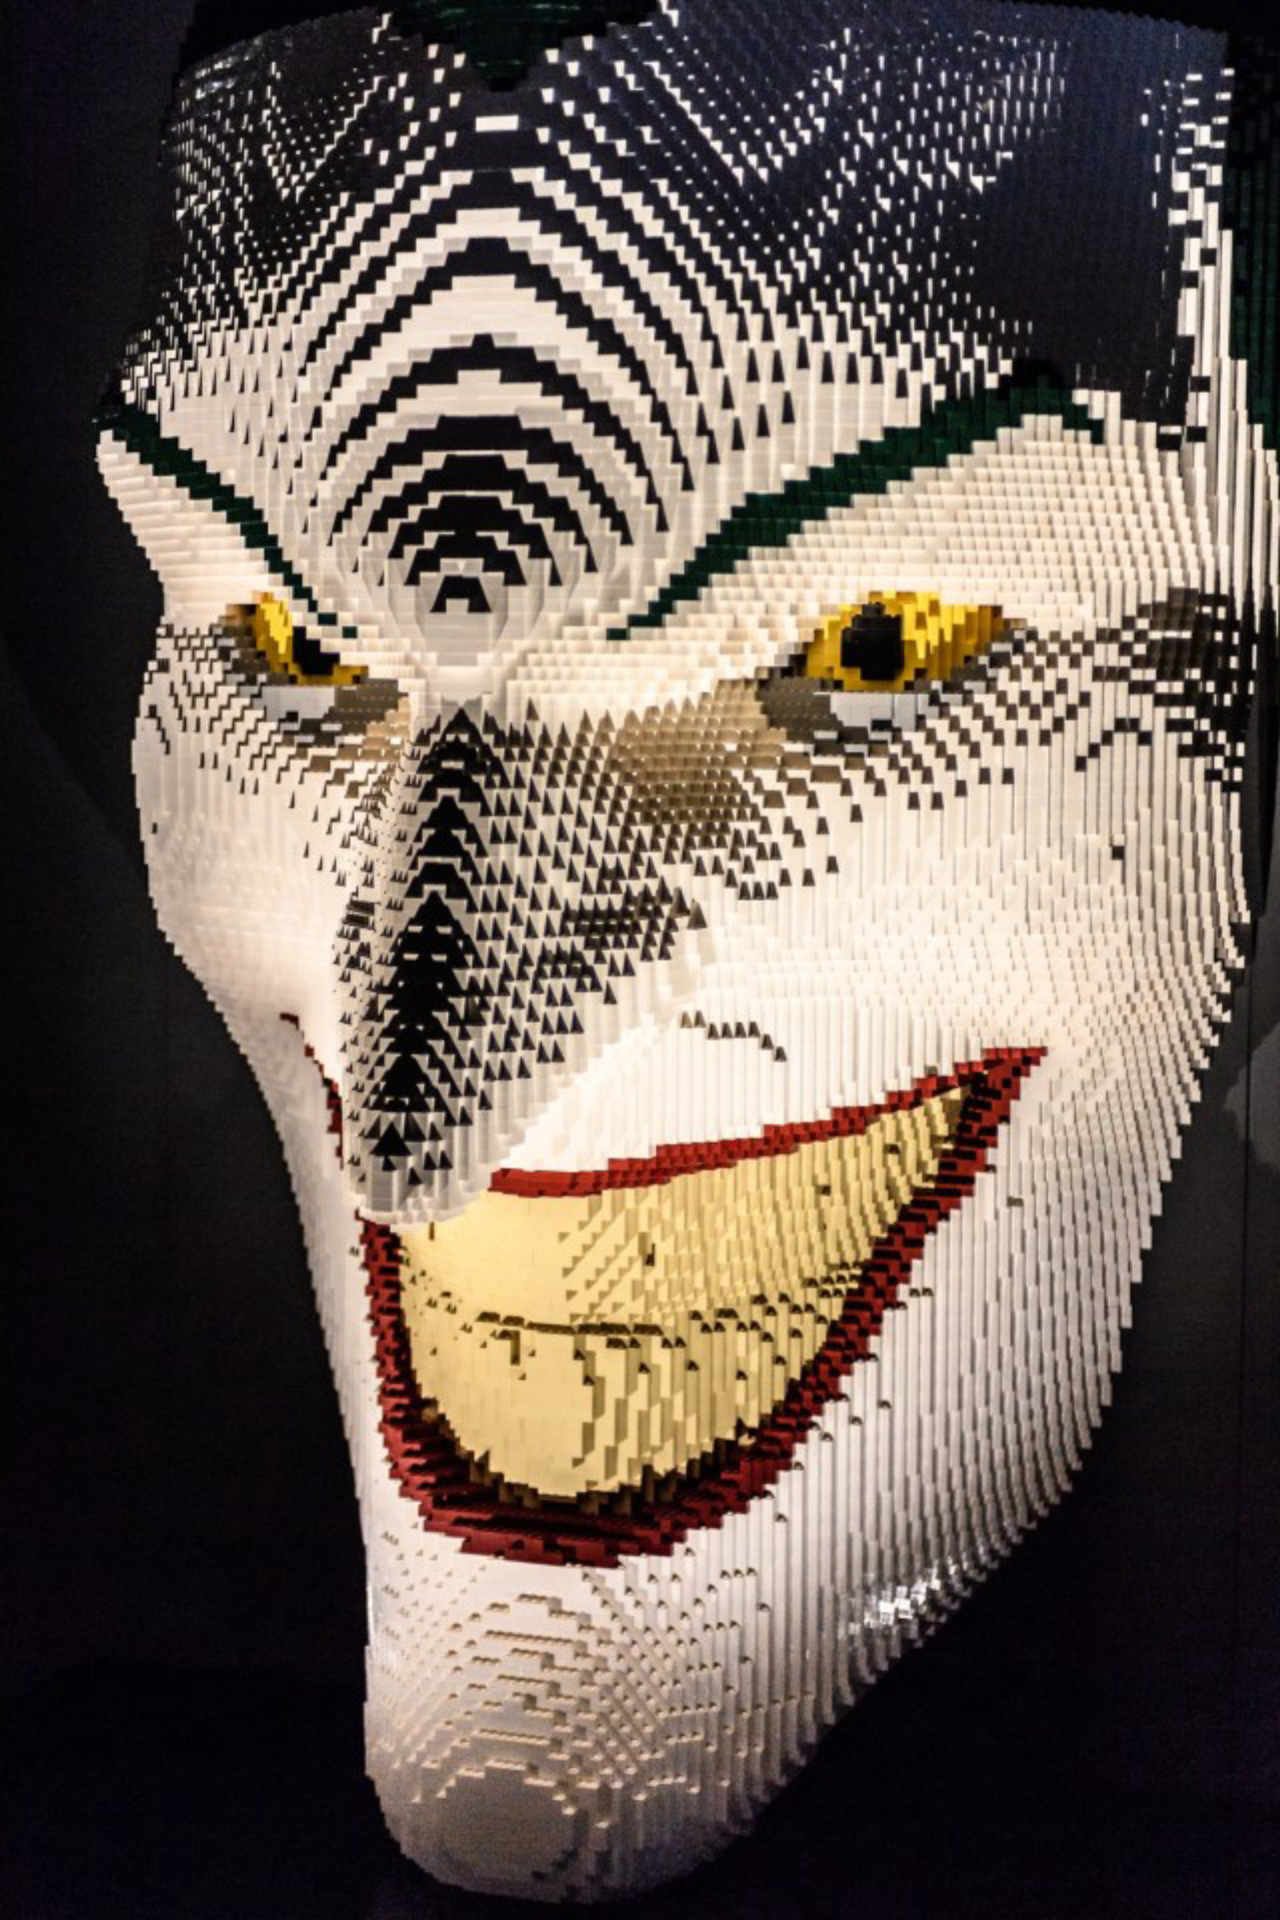 THE ART OF THE BRICK: DC SUPER HEROES - Artist Nathan Sawaya returns to London with the world's largest LEGO exhibition, inspired by Batman, Superman, and Wonder Woman. The exhibition opens, in a purpose-built marquee in Doon Street car park, Upper Ground, on the South Bank. Picture shows: The Joker Facemask.